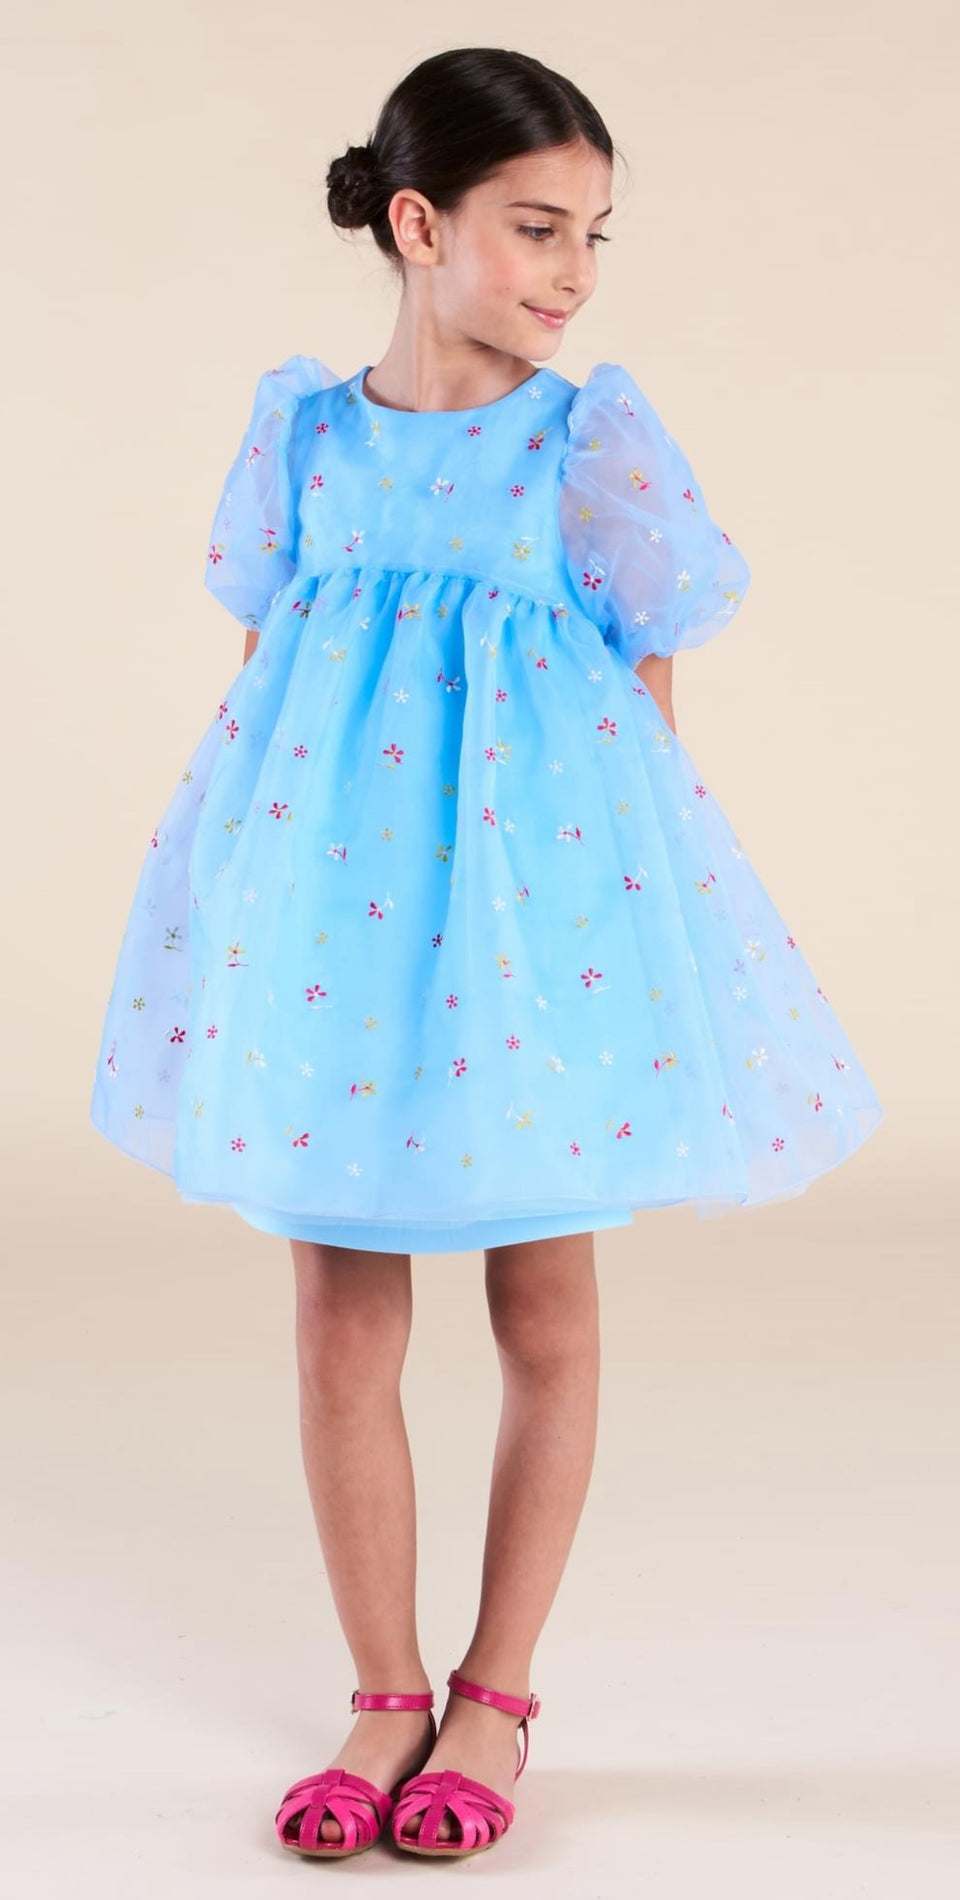 Mimisol Blue Organza Dress with Flowers- 3/4 Sleeves